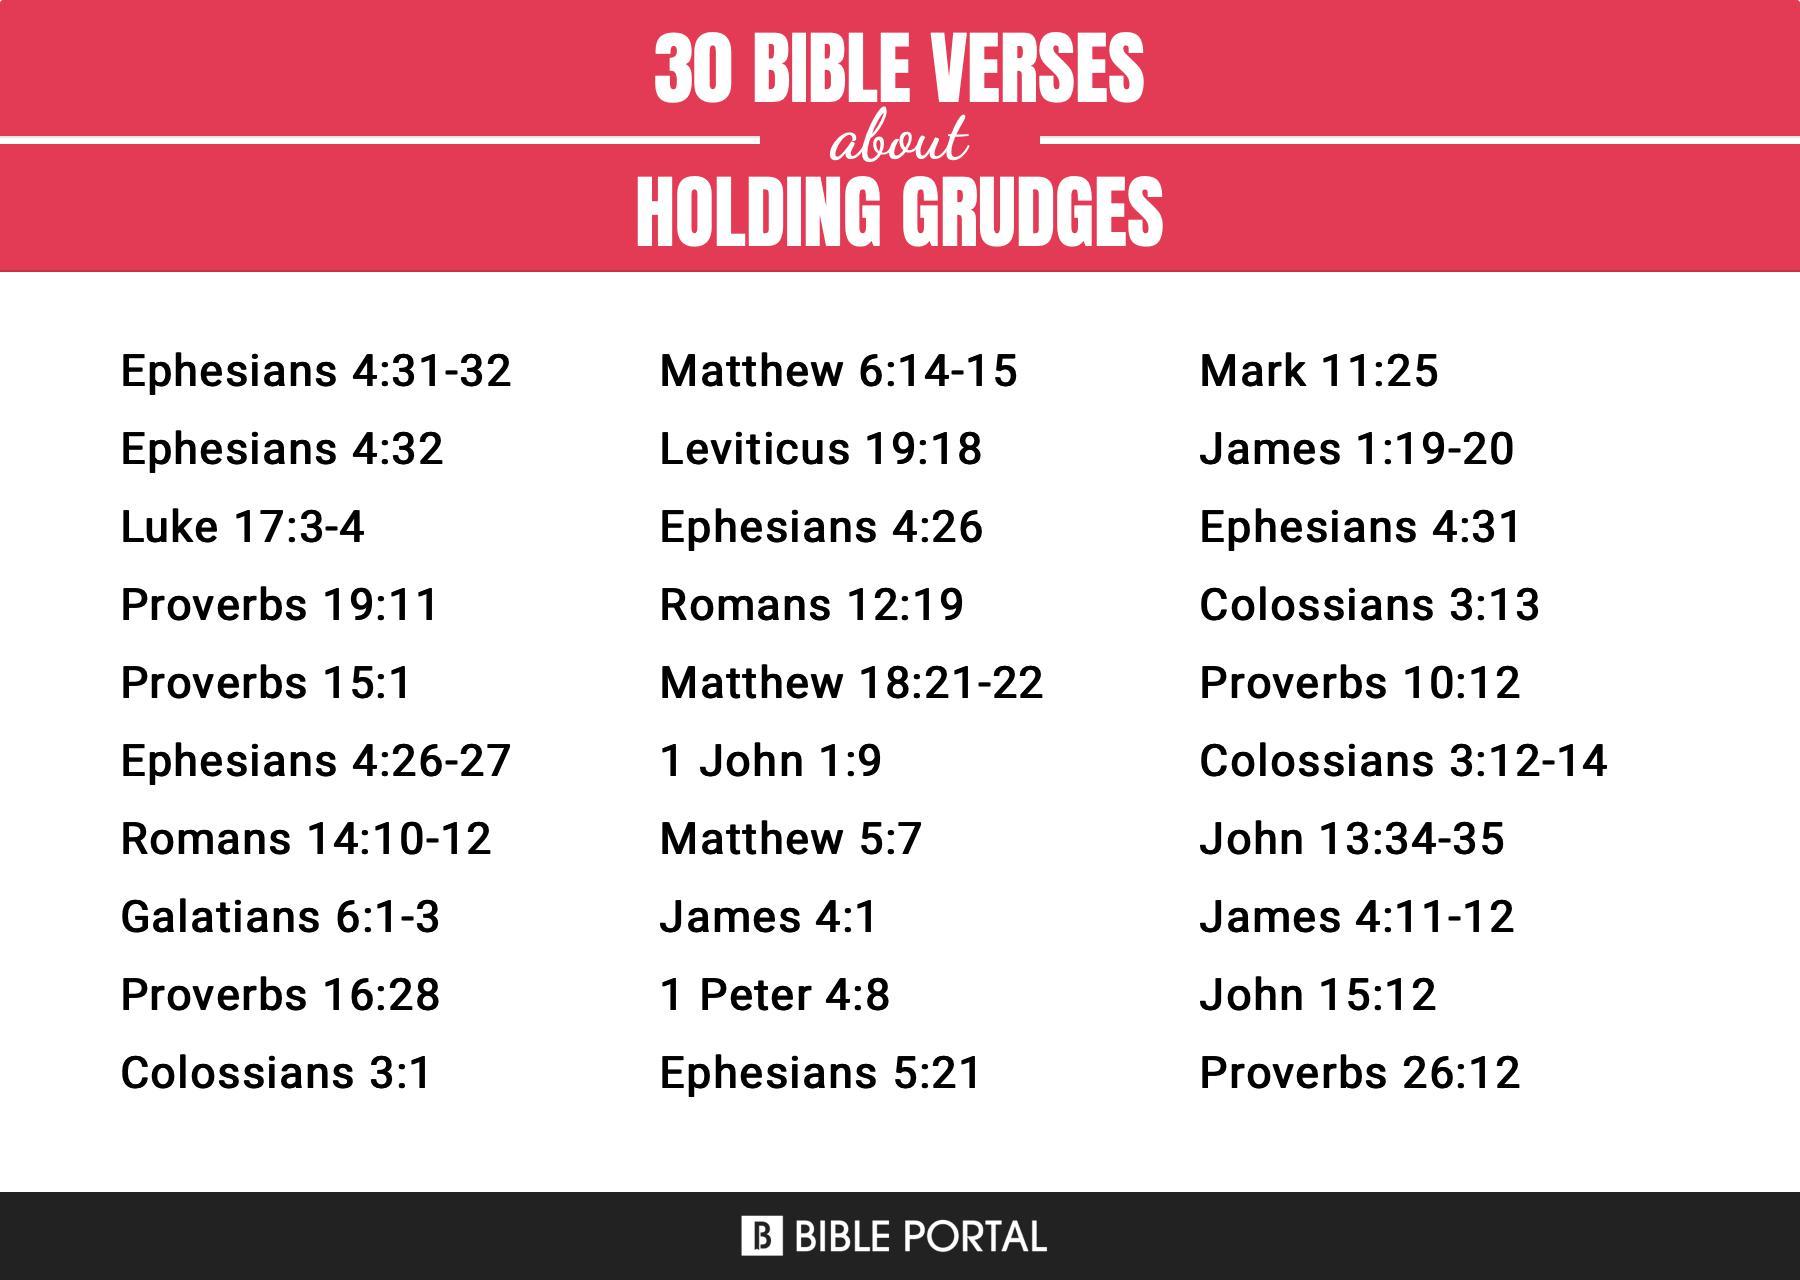 What Does the Bible Say about Holding Grudges?